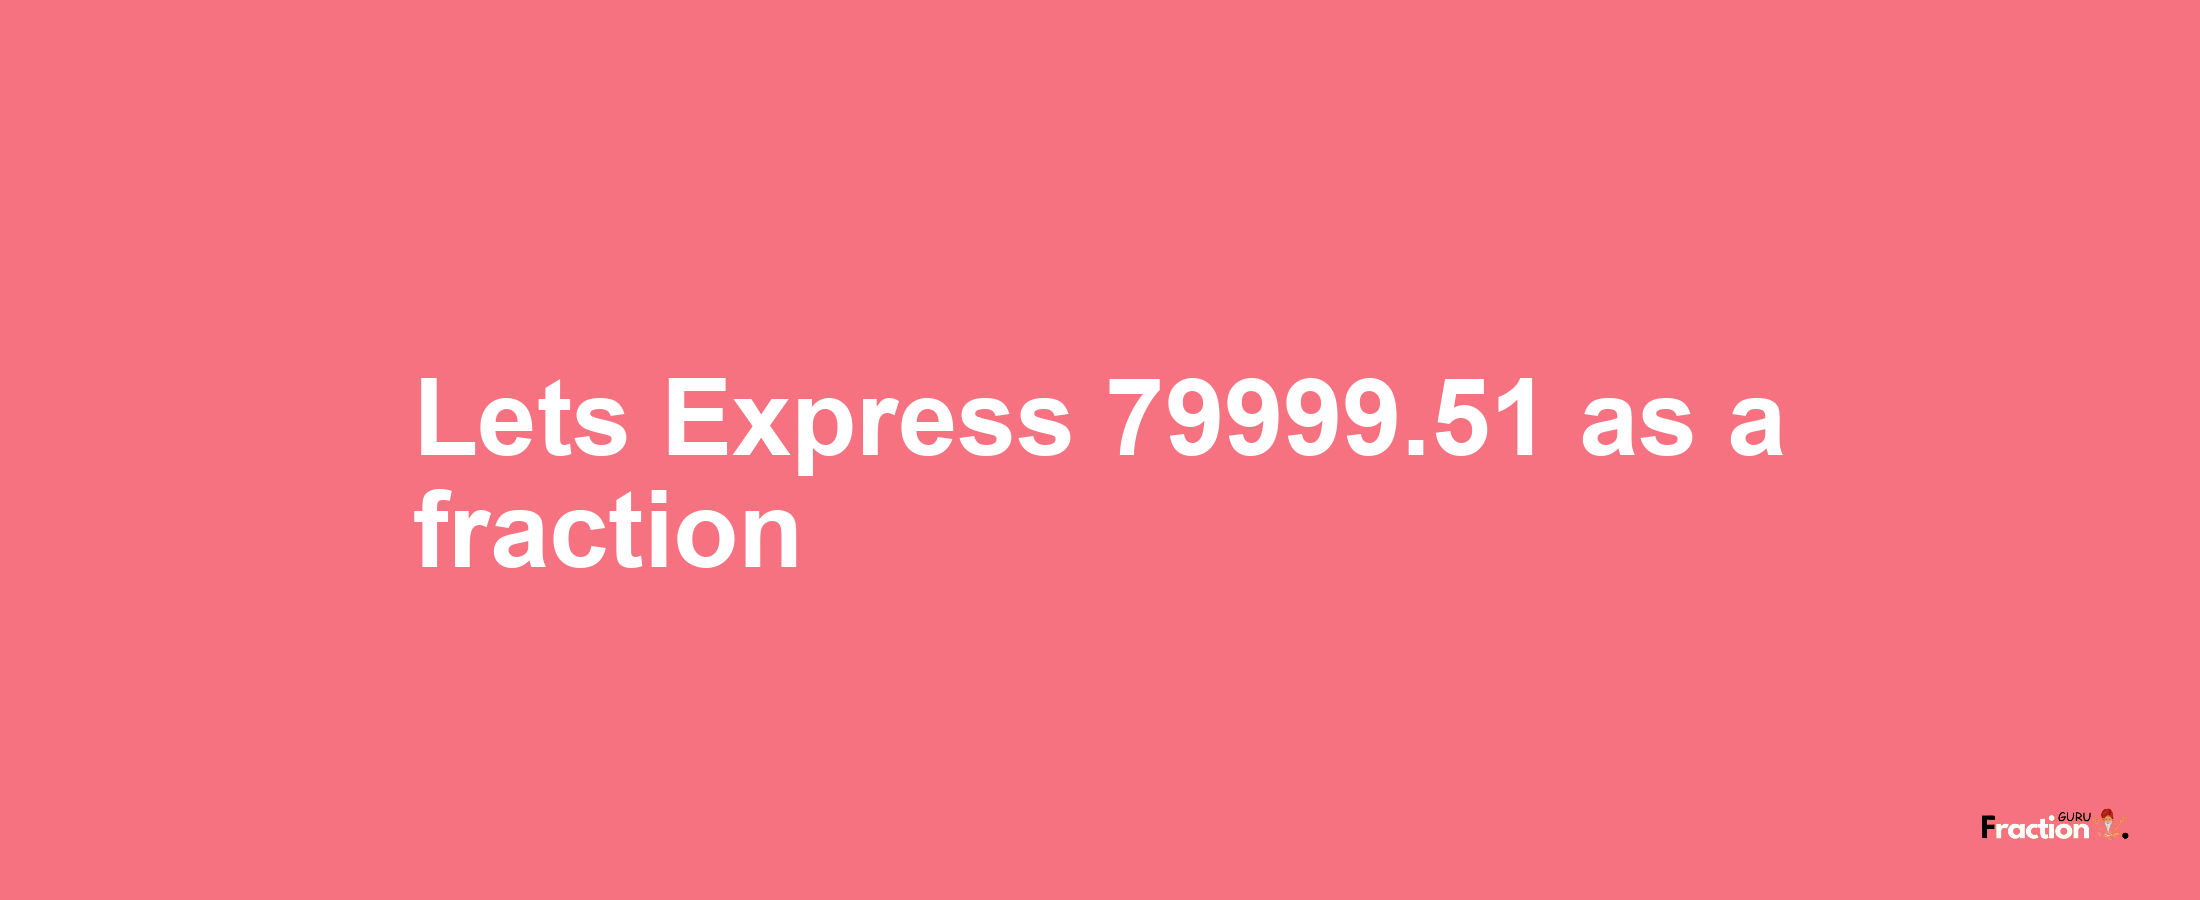 Lets Express 79999.51 as afraction